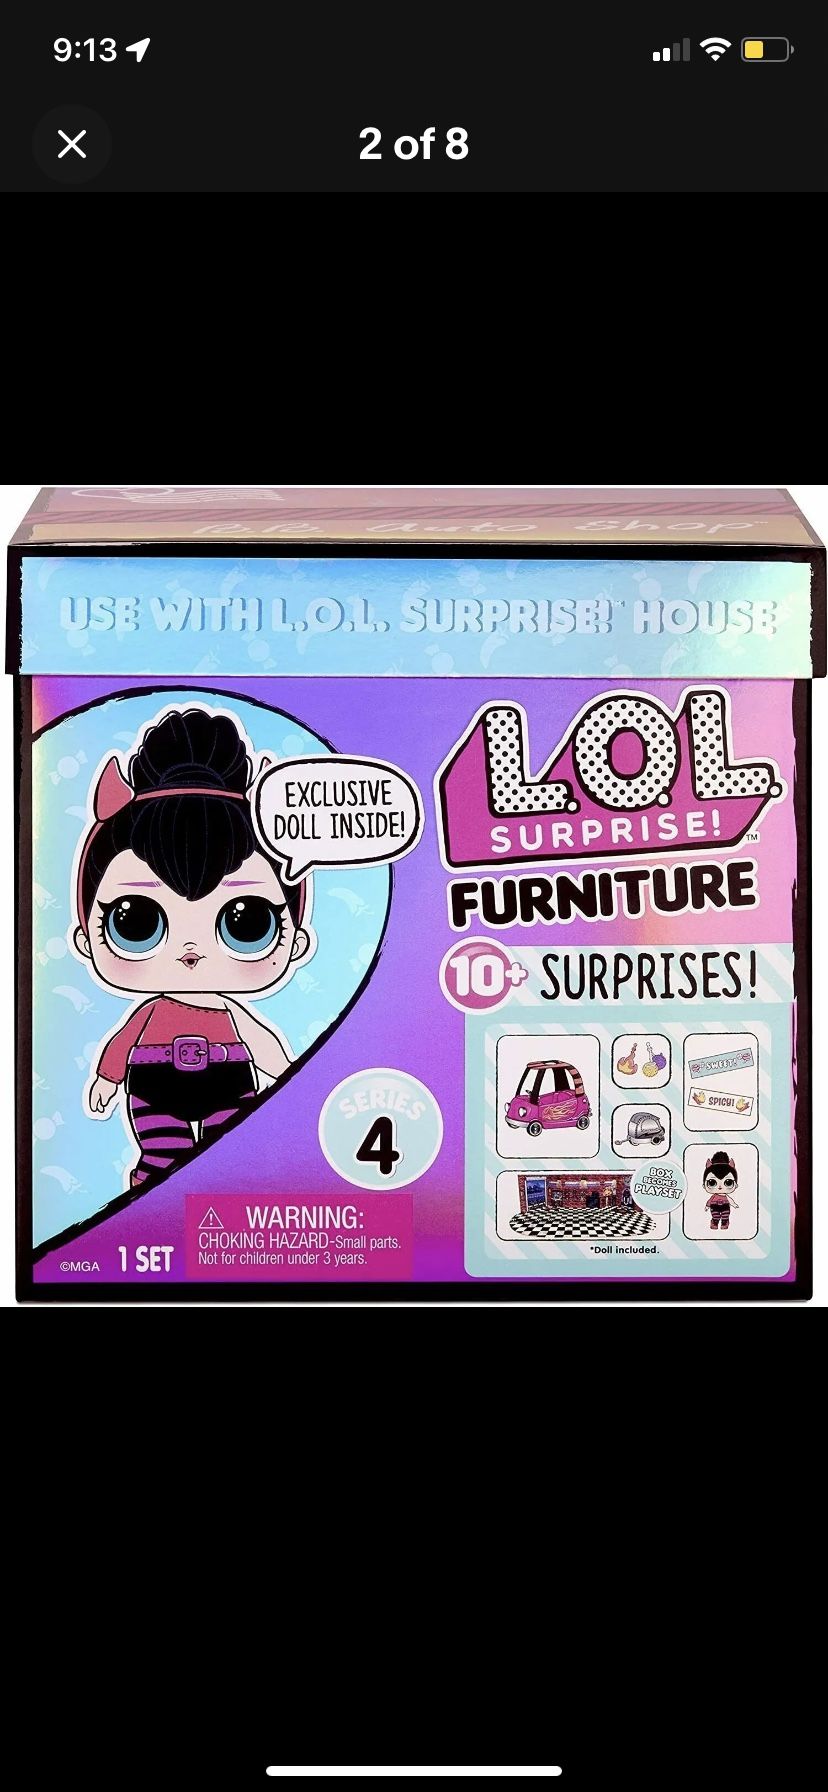 L.O.L. Surprise Furniture B.B. Auto Shop with Spice Doll and 10+ Surprises NEW